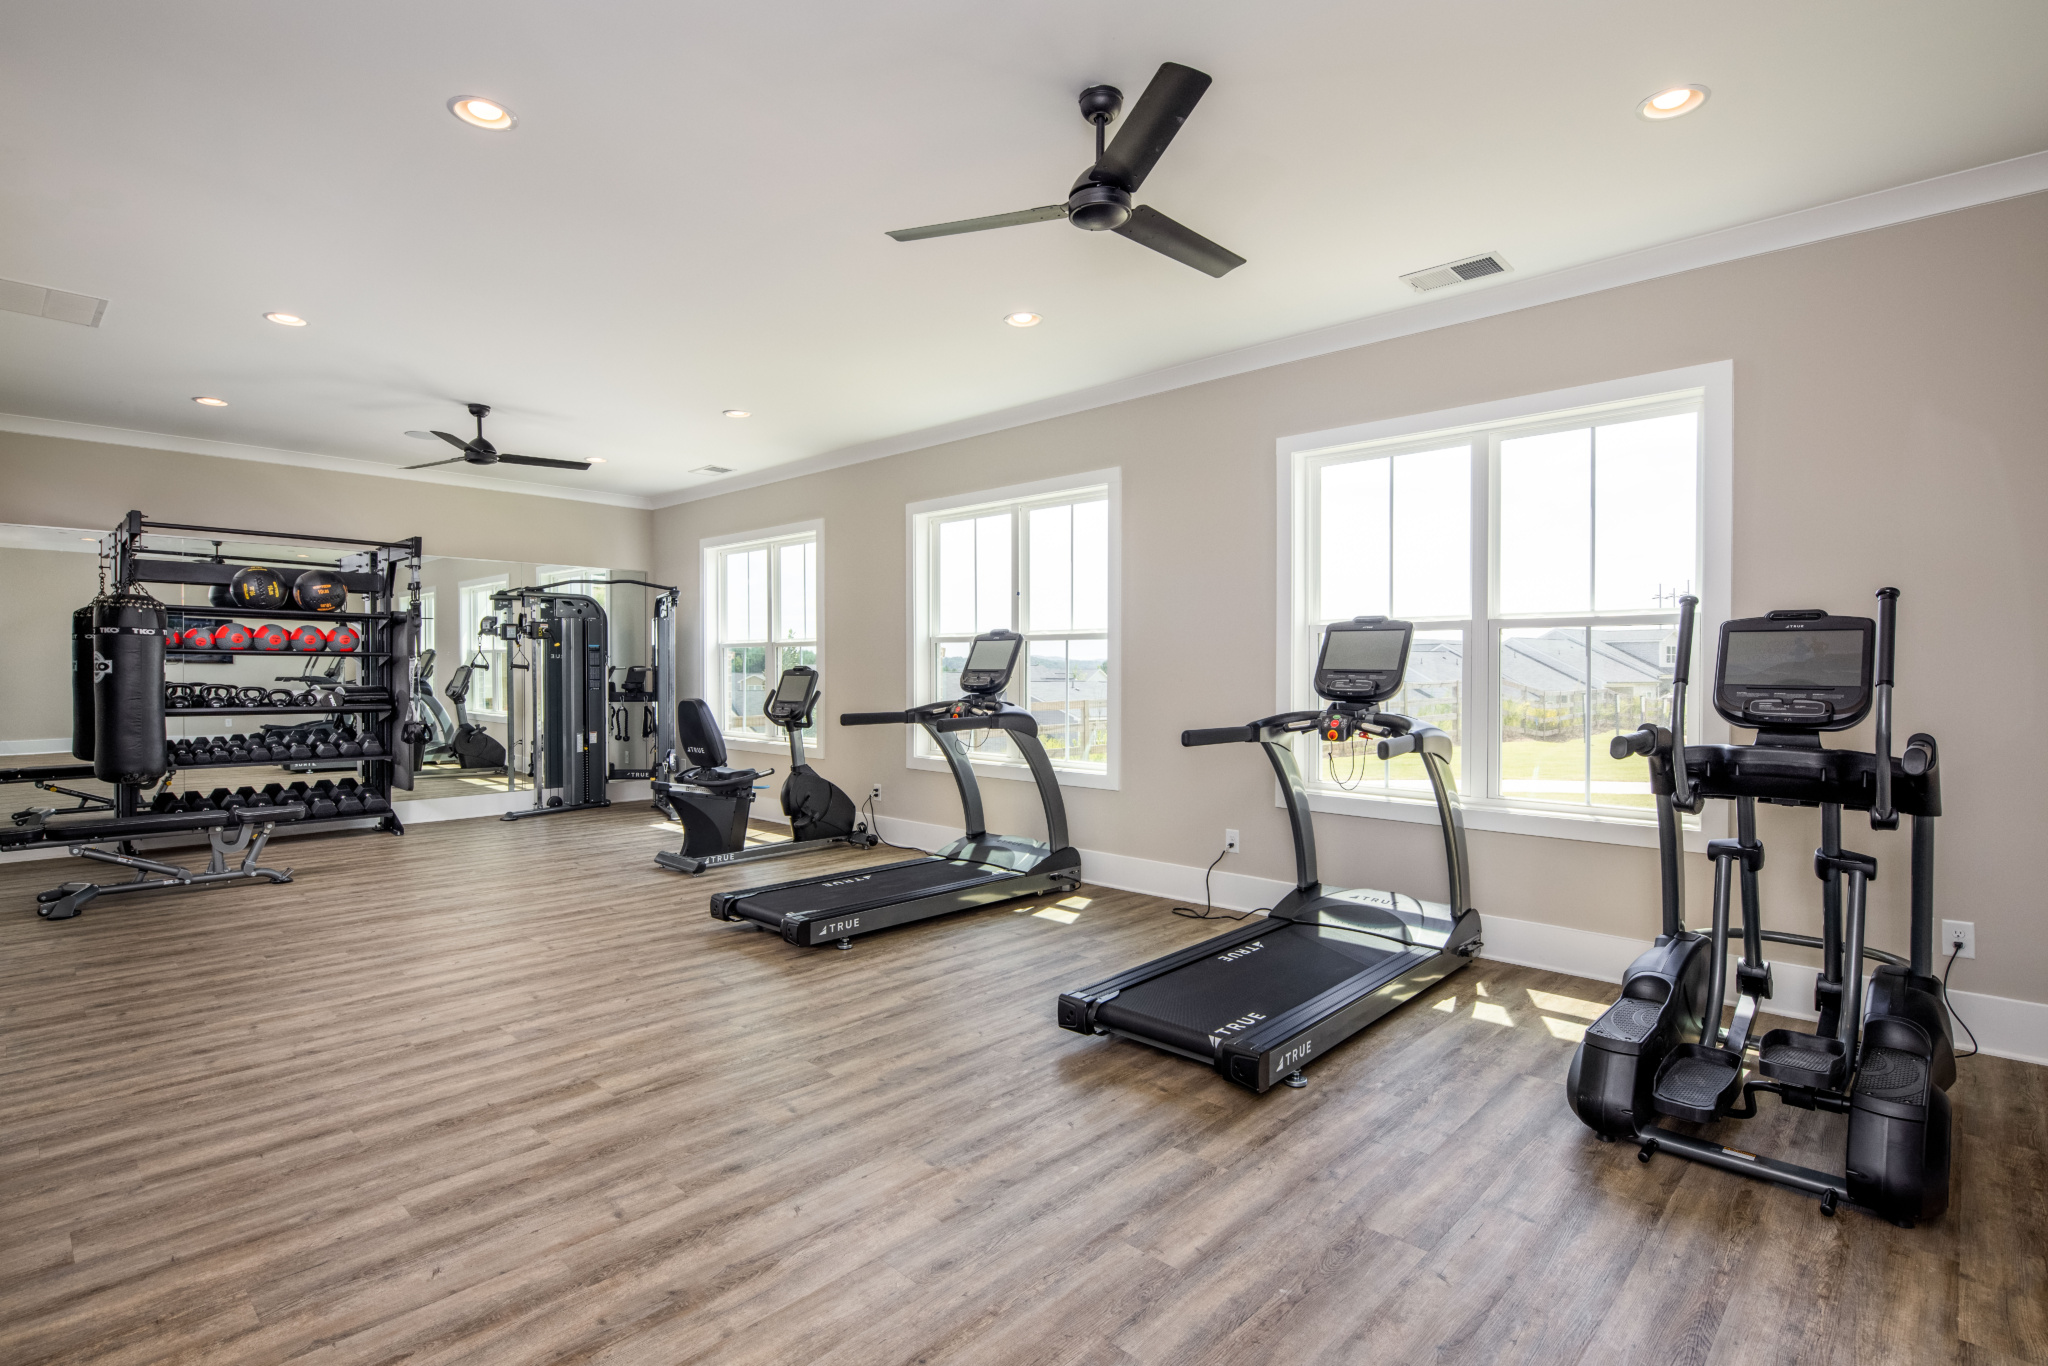 community center gym with treadmills and weights